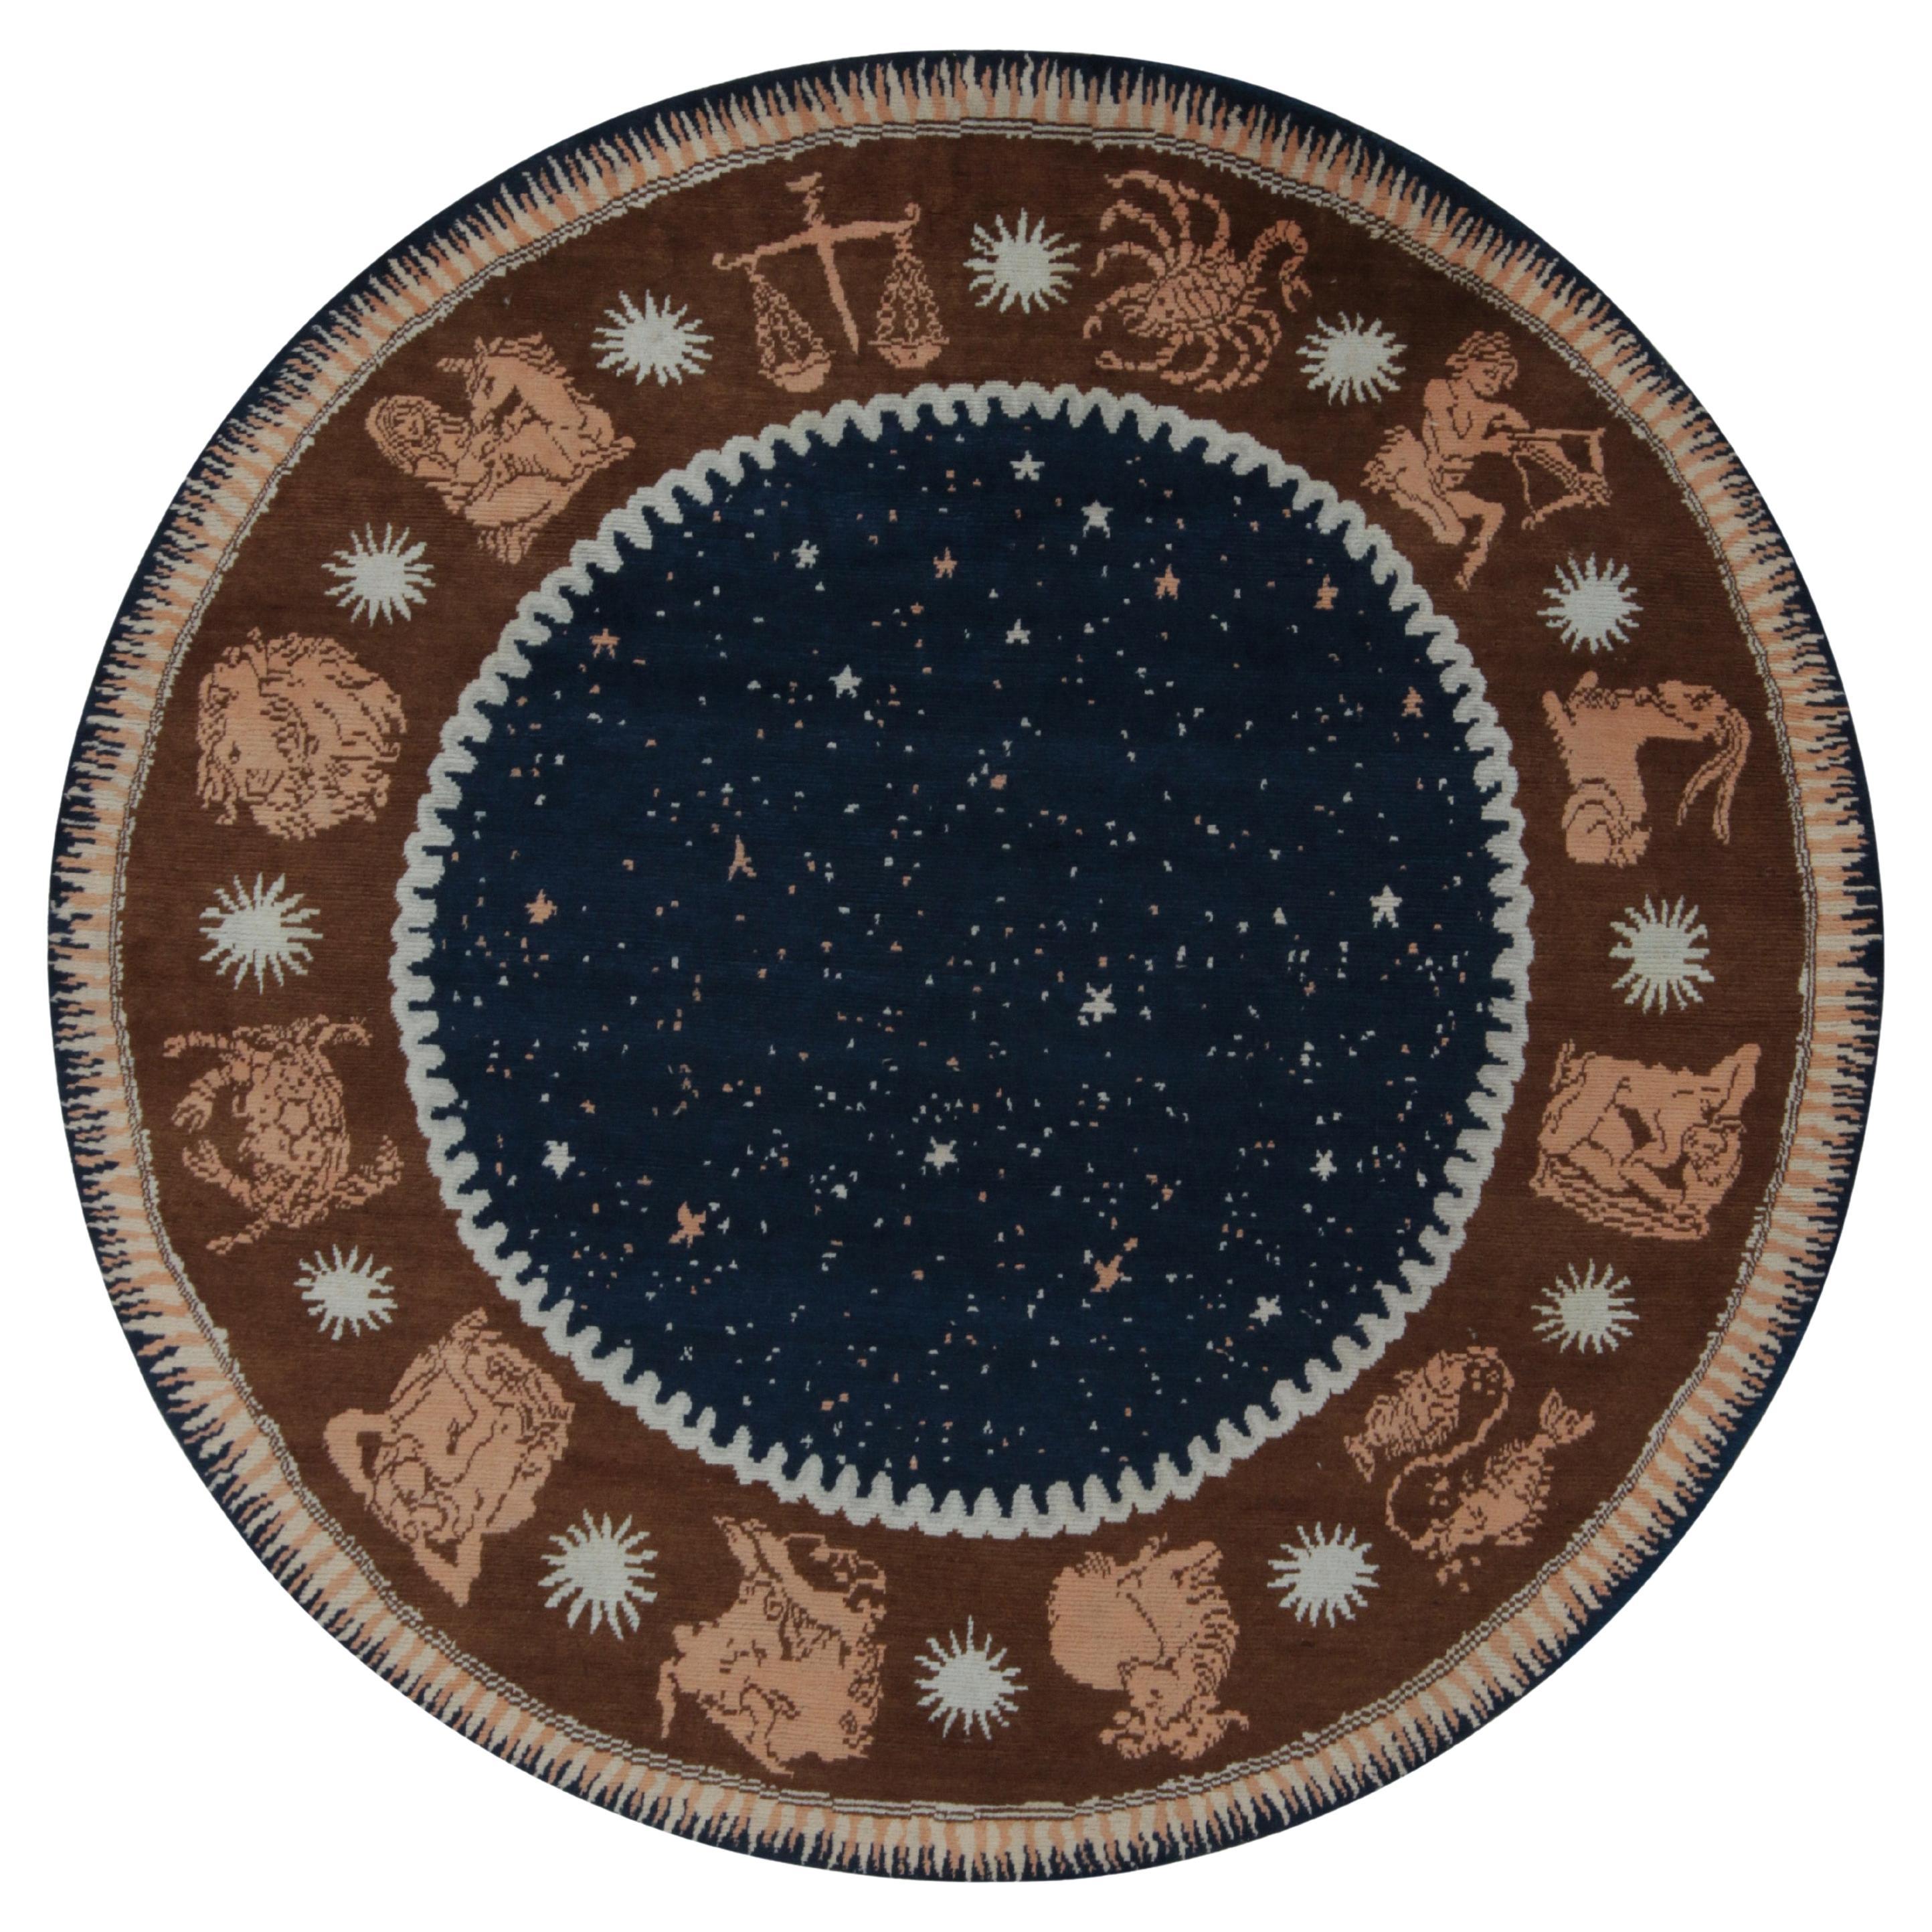 Rug & Kilim’s French Deco Style Circle Rug in Blue, Beige-Brown Zodiac Pictorial